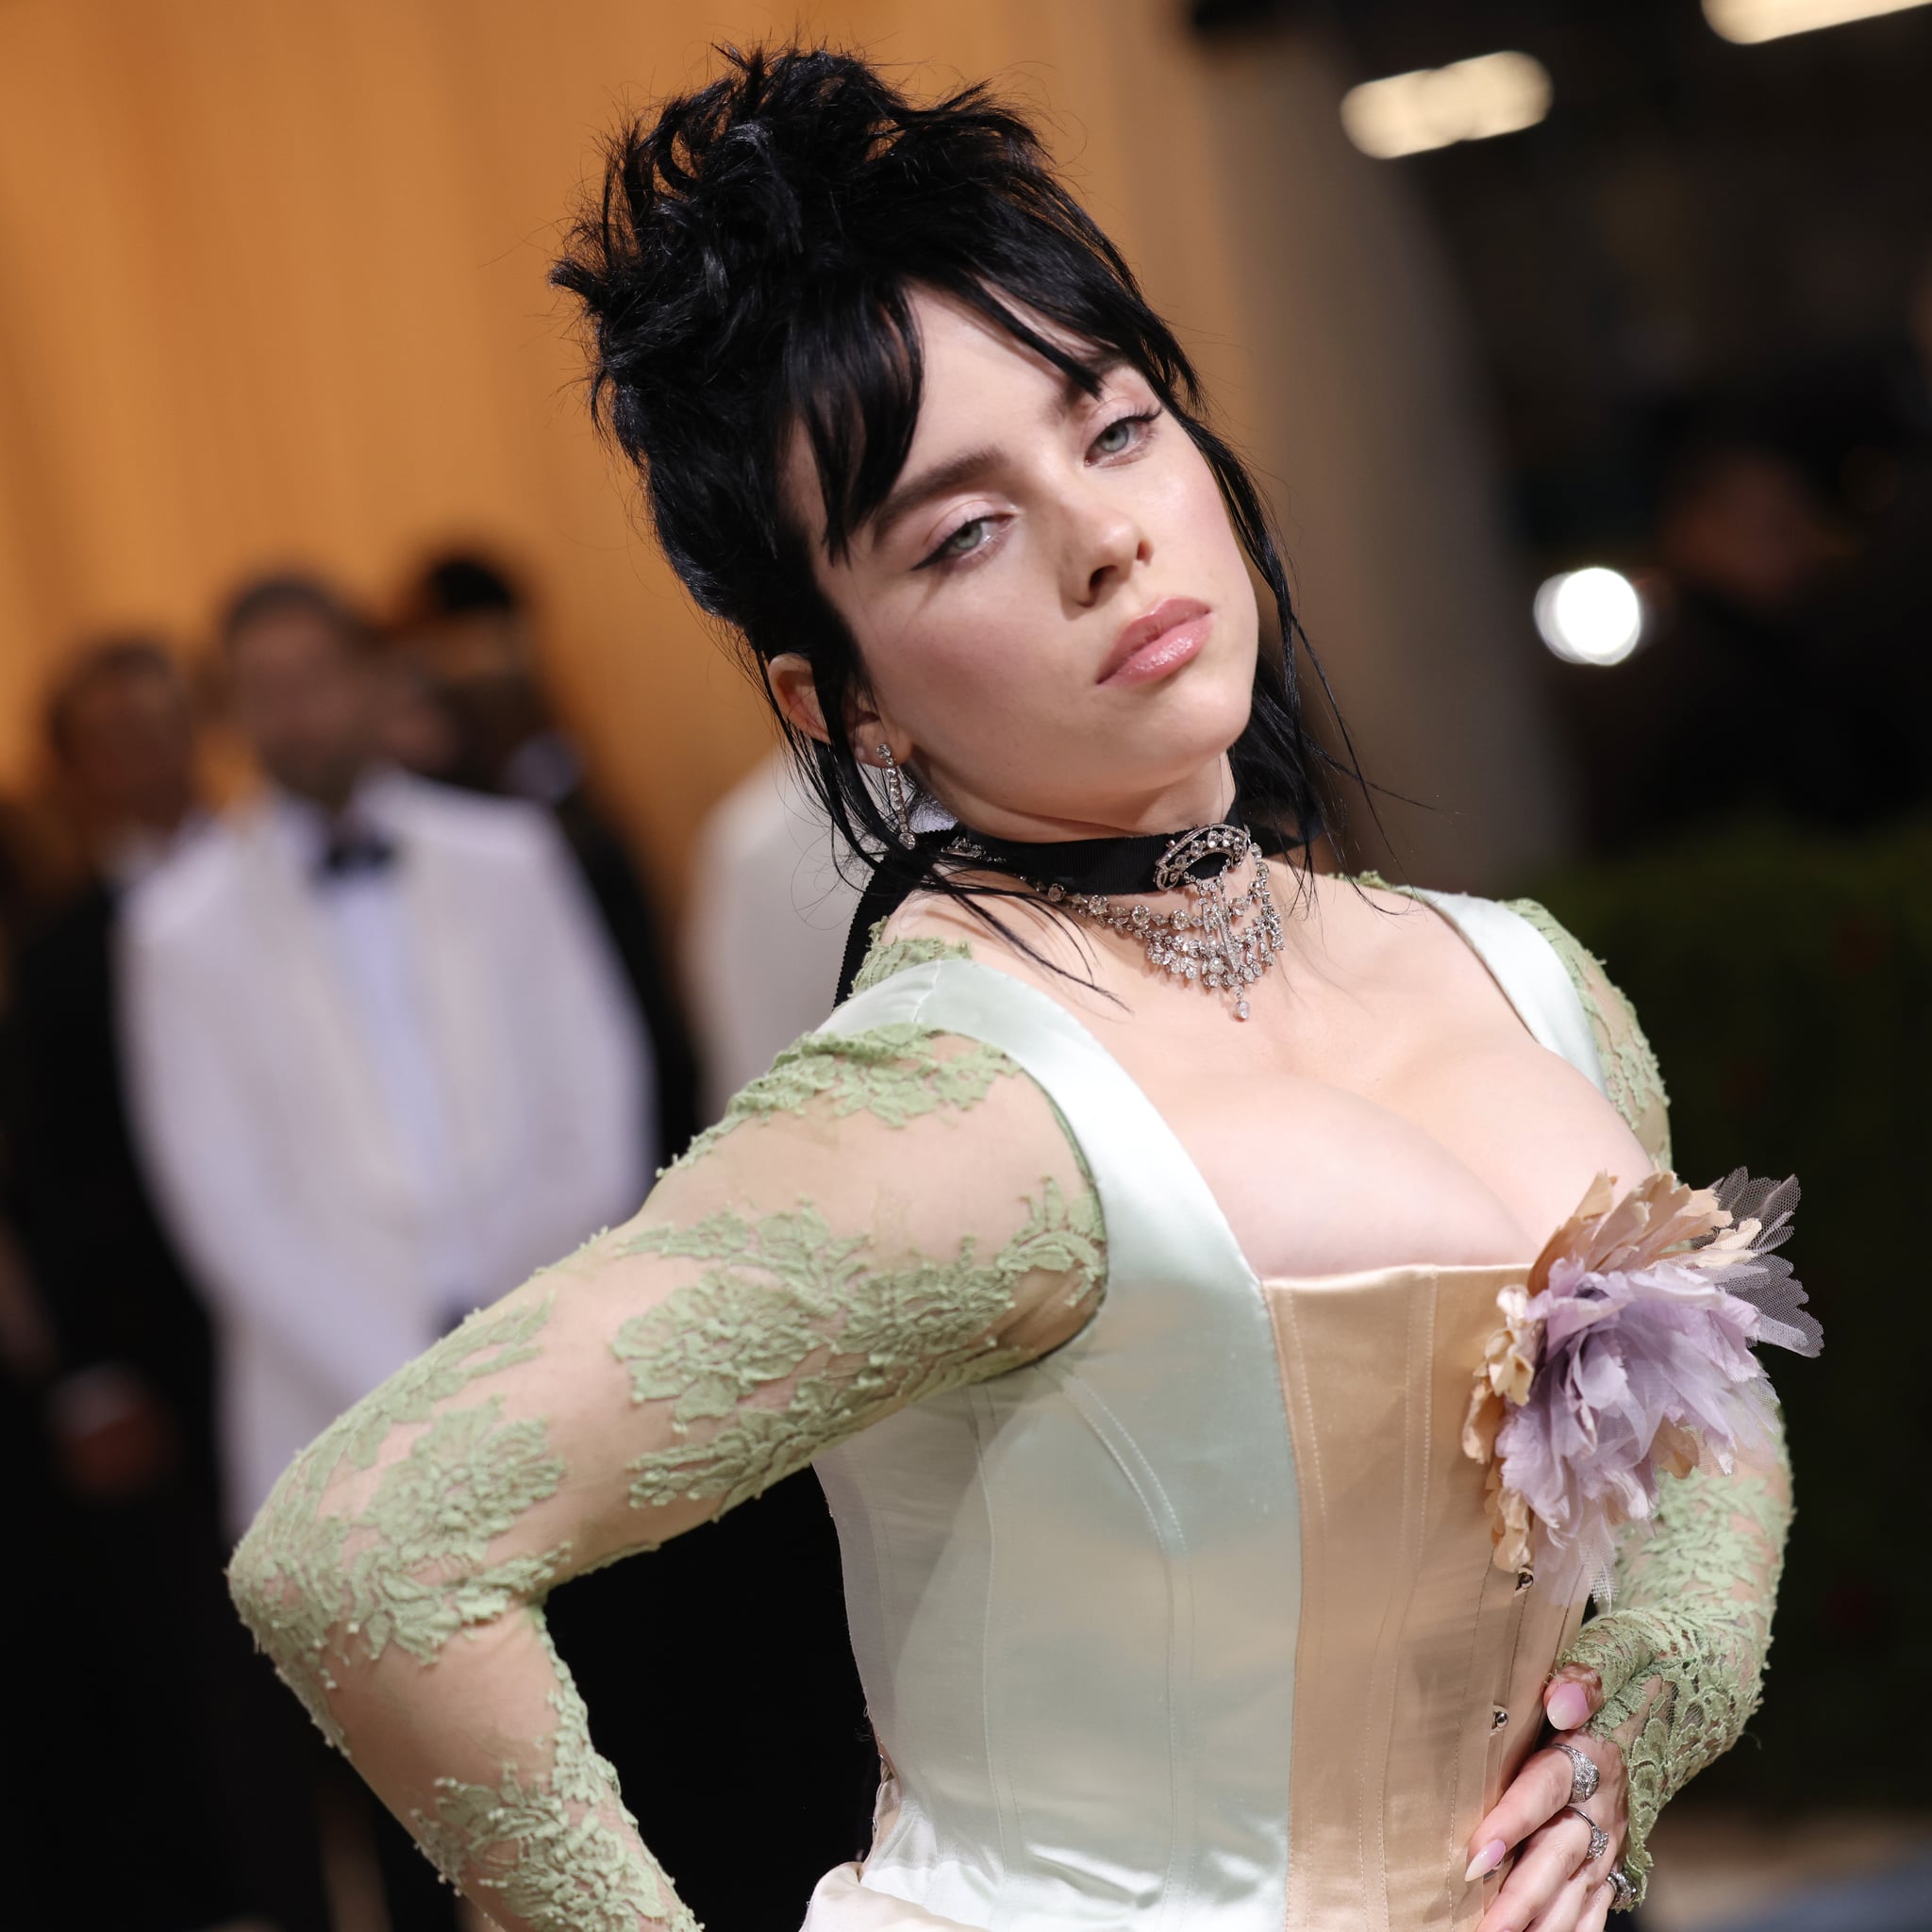 Met Gala 2022: What is the theme?